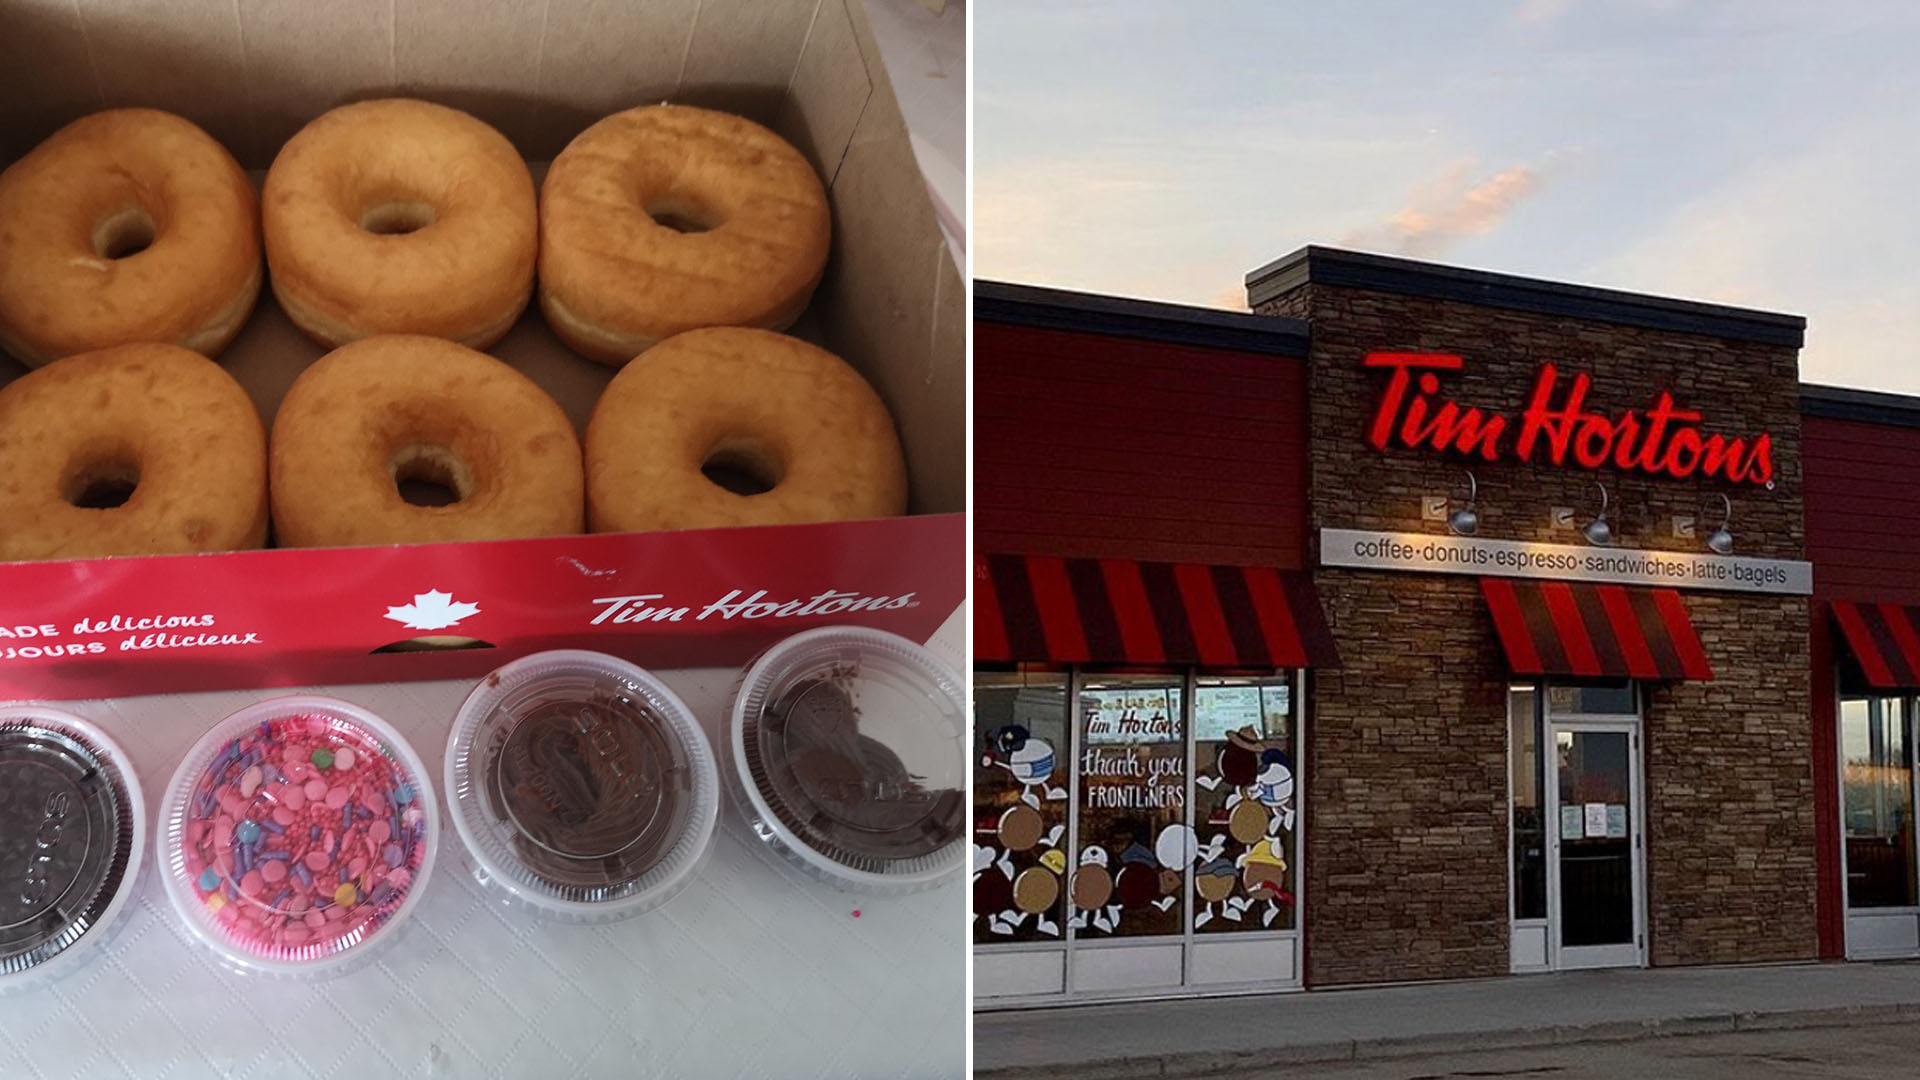 Tim Hortons is offering DIY Mother's Day donut kits across Canada